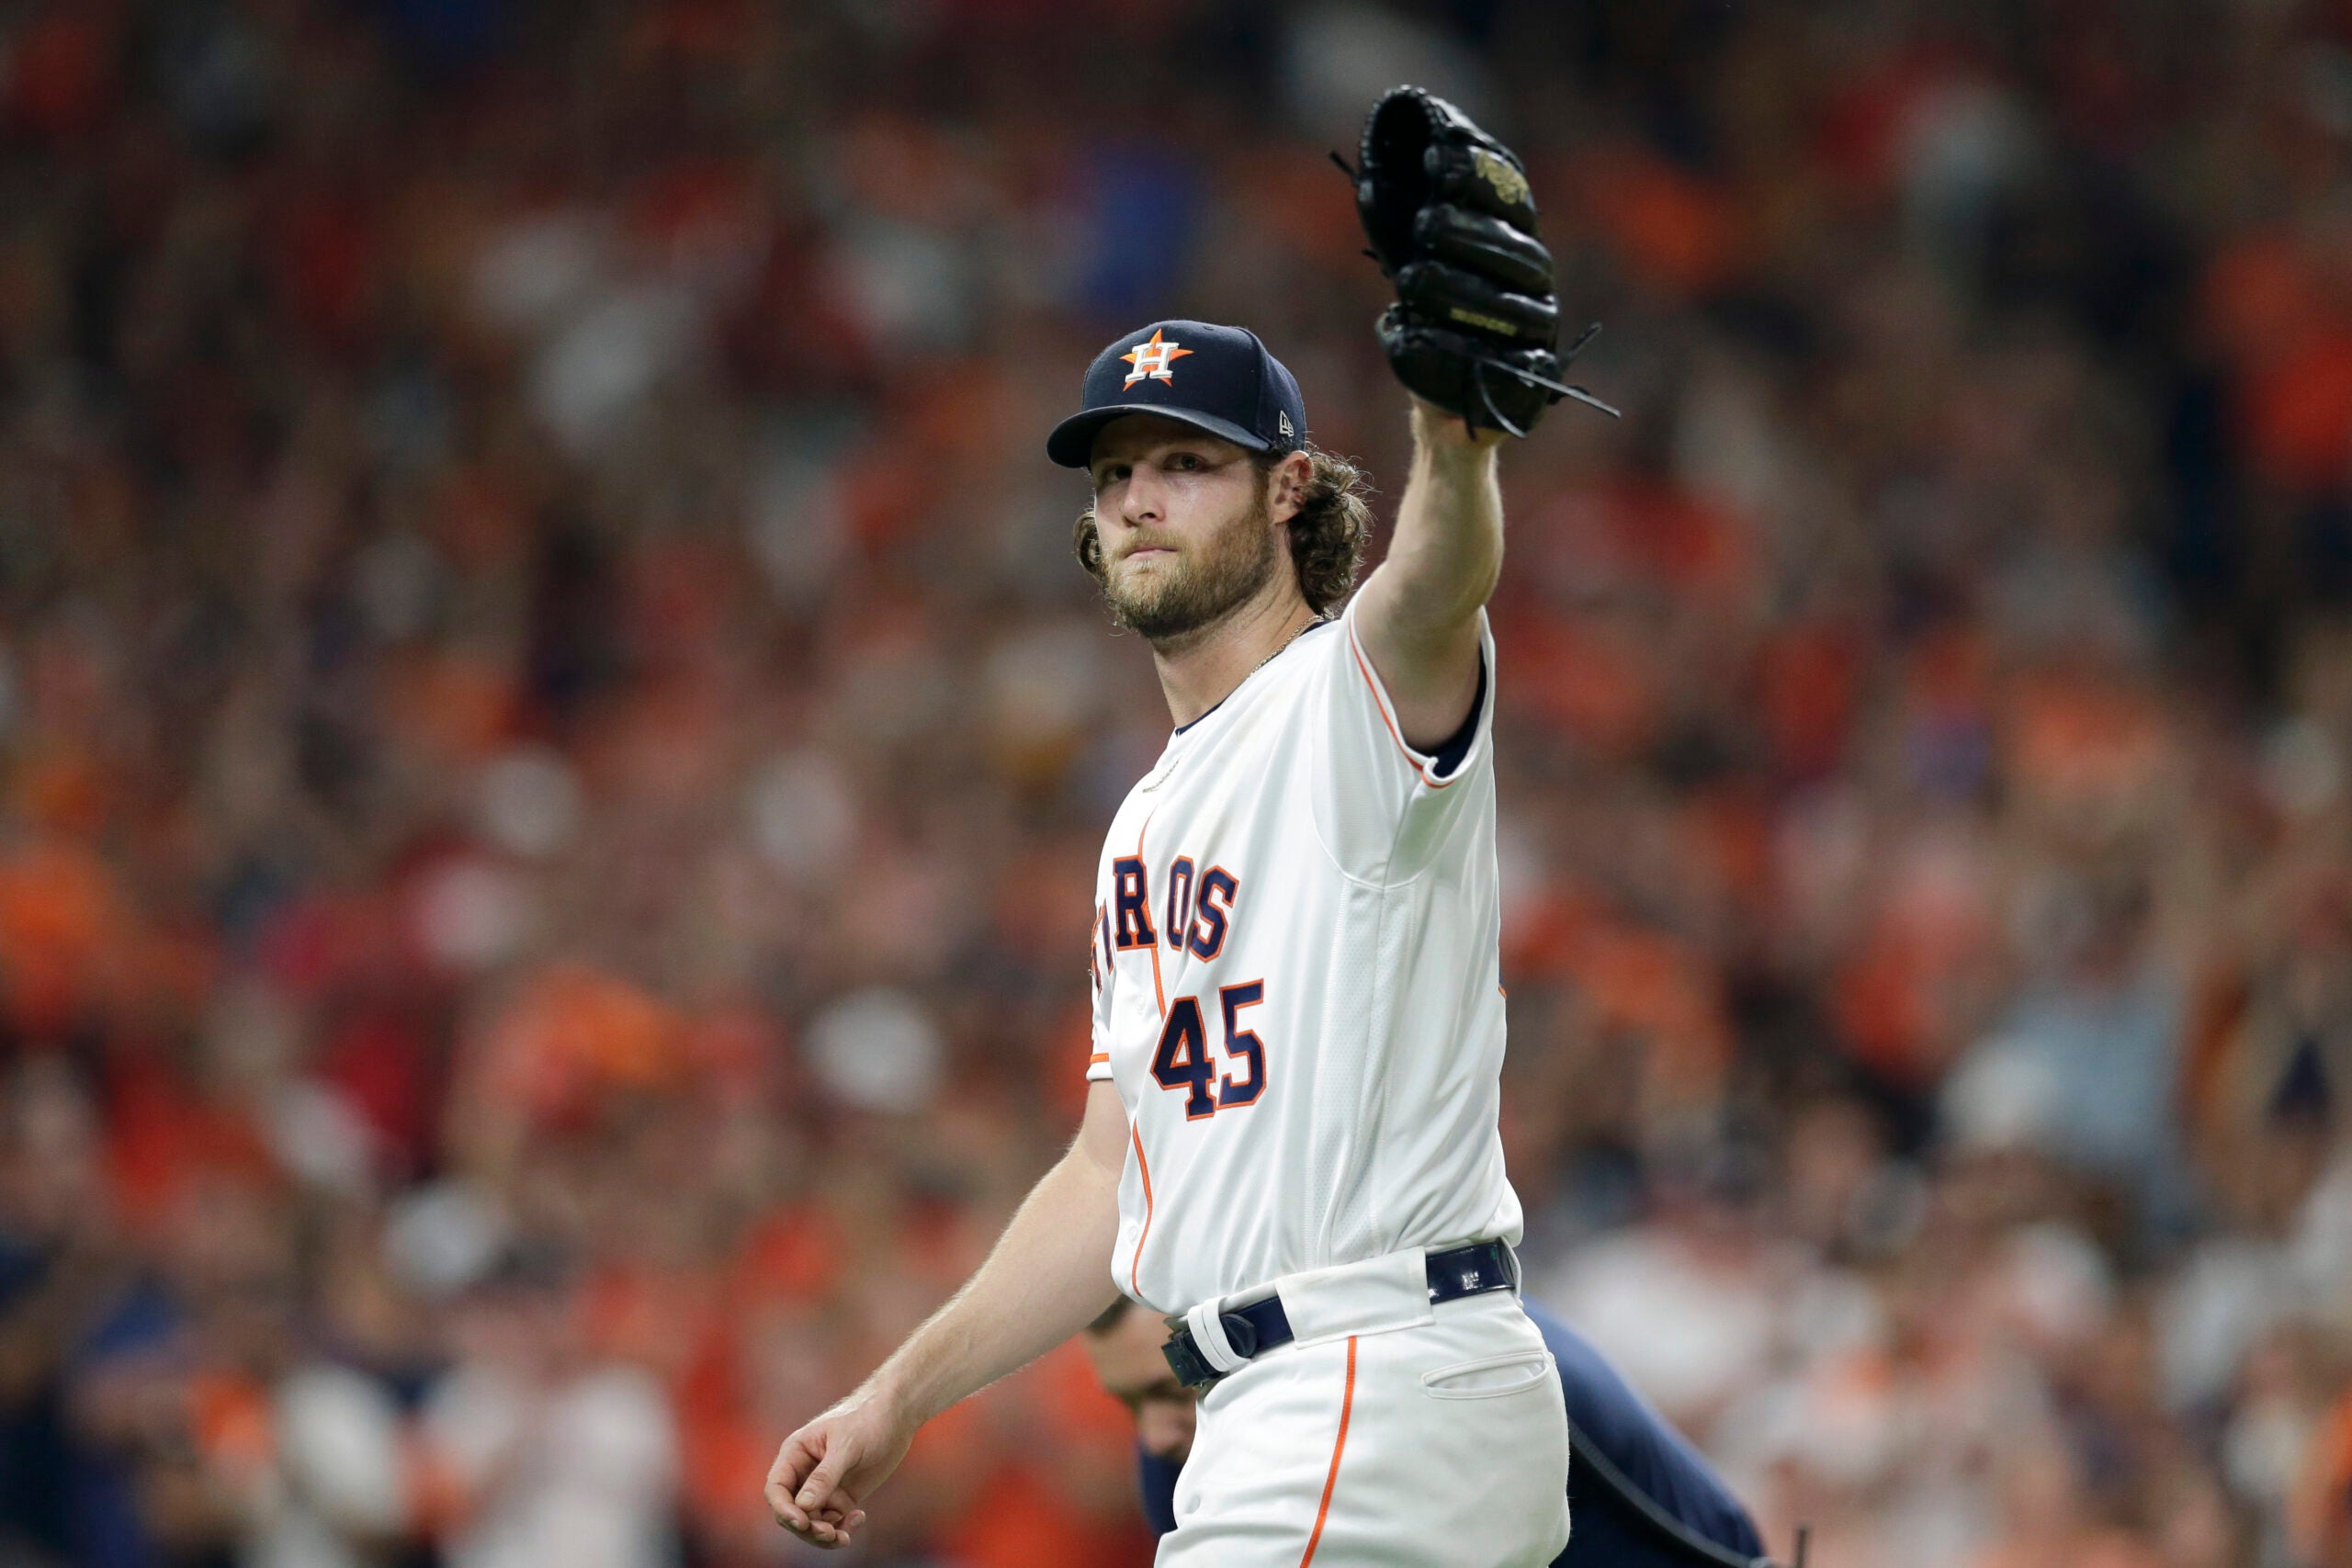 Why Yankees' Aaron Boone compared Astros' Gerrit Cole to a Little Leaguer 